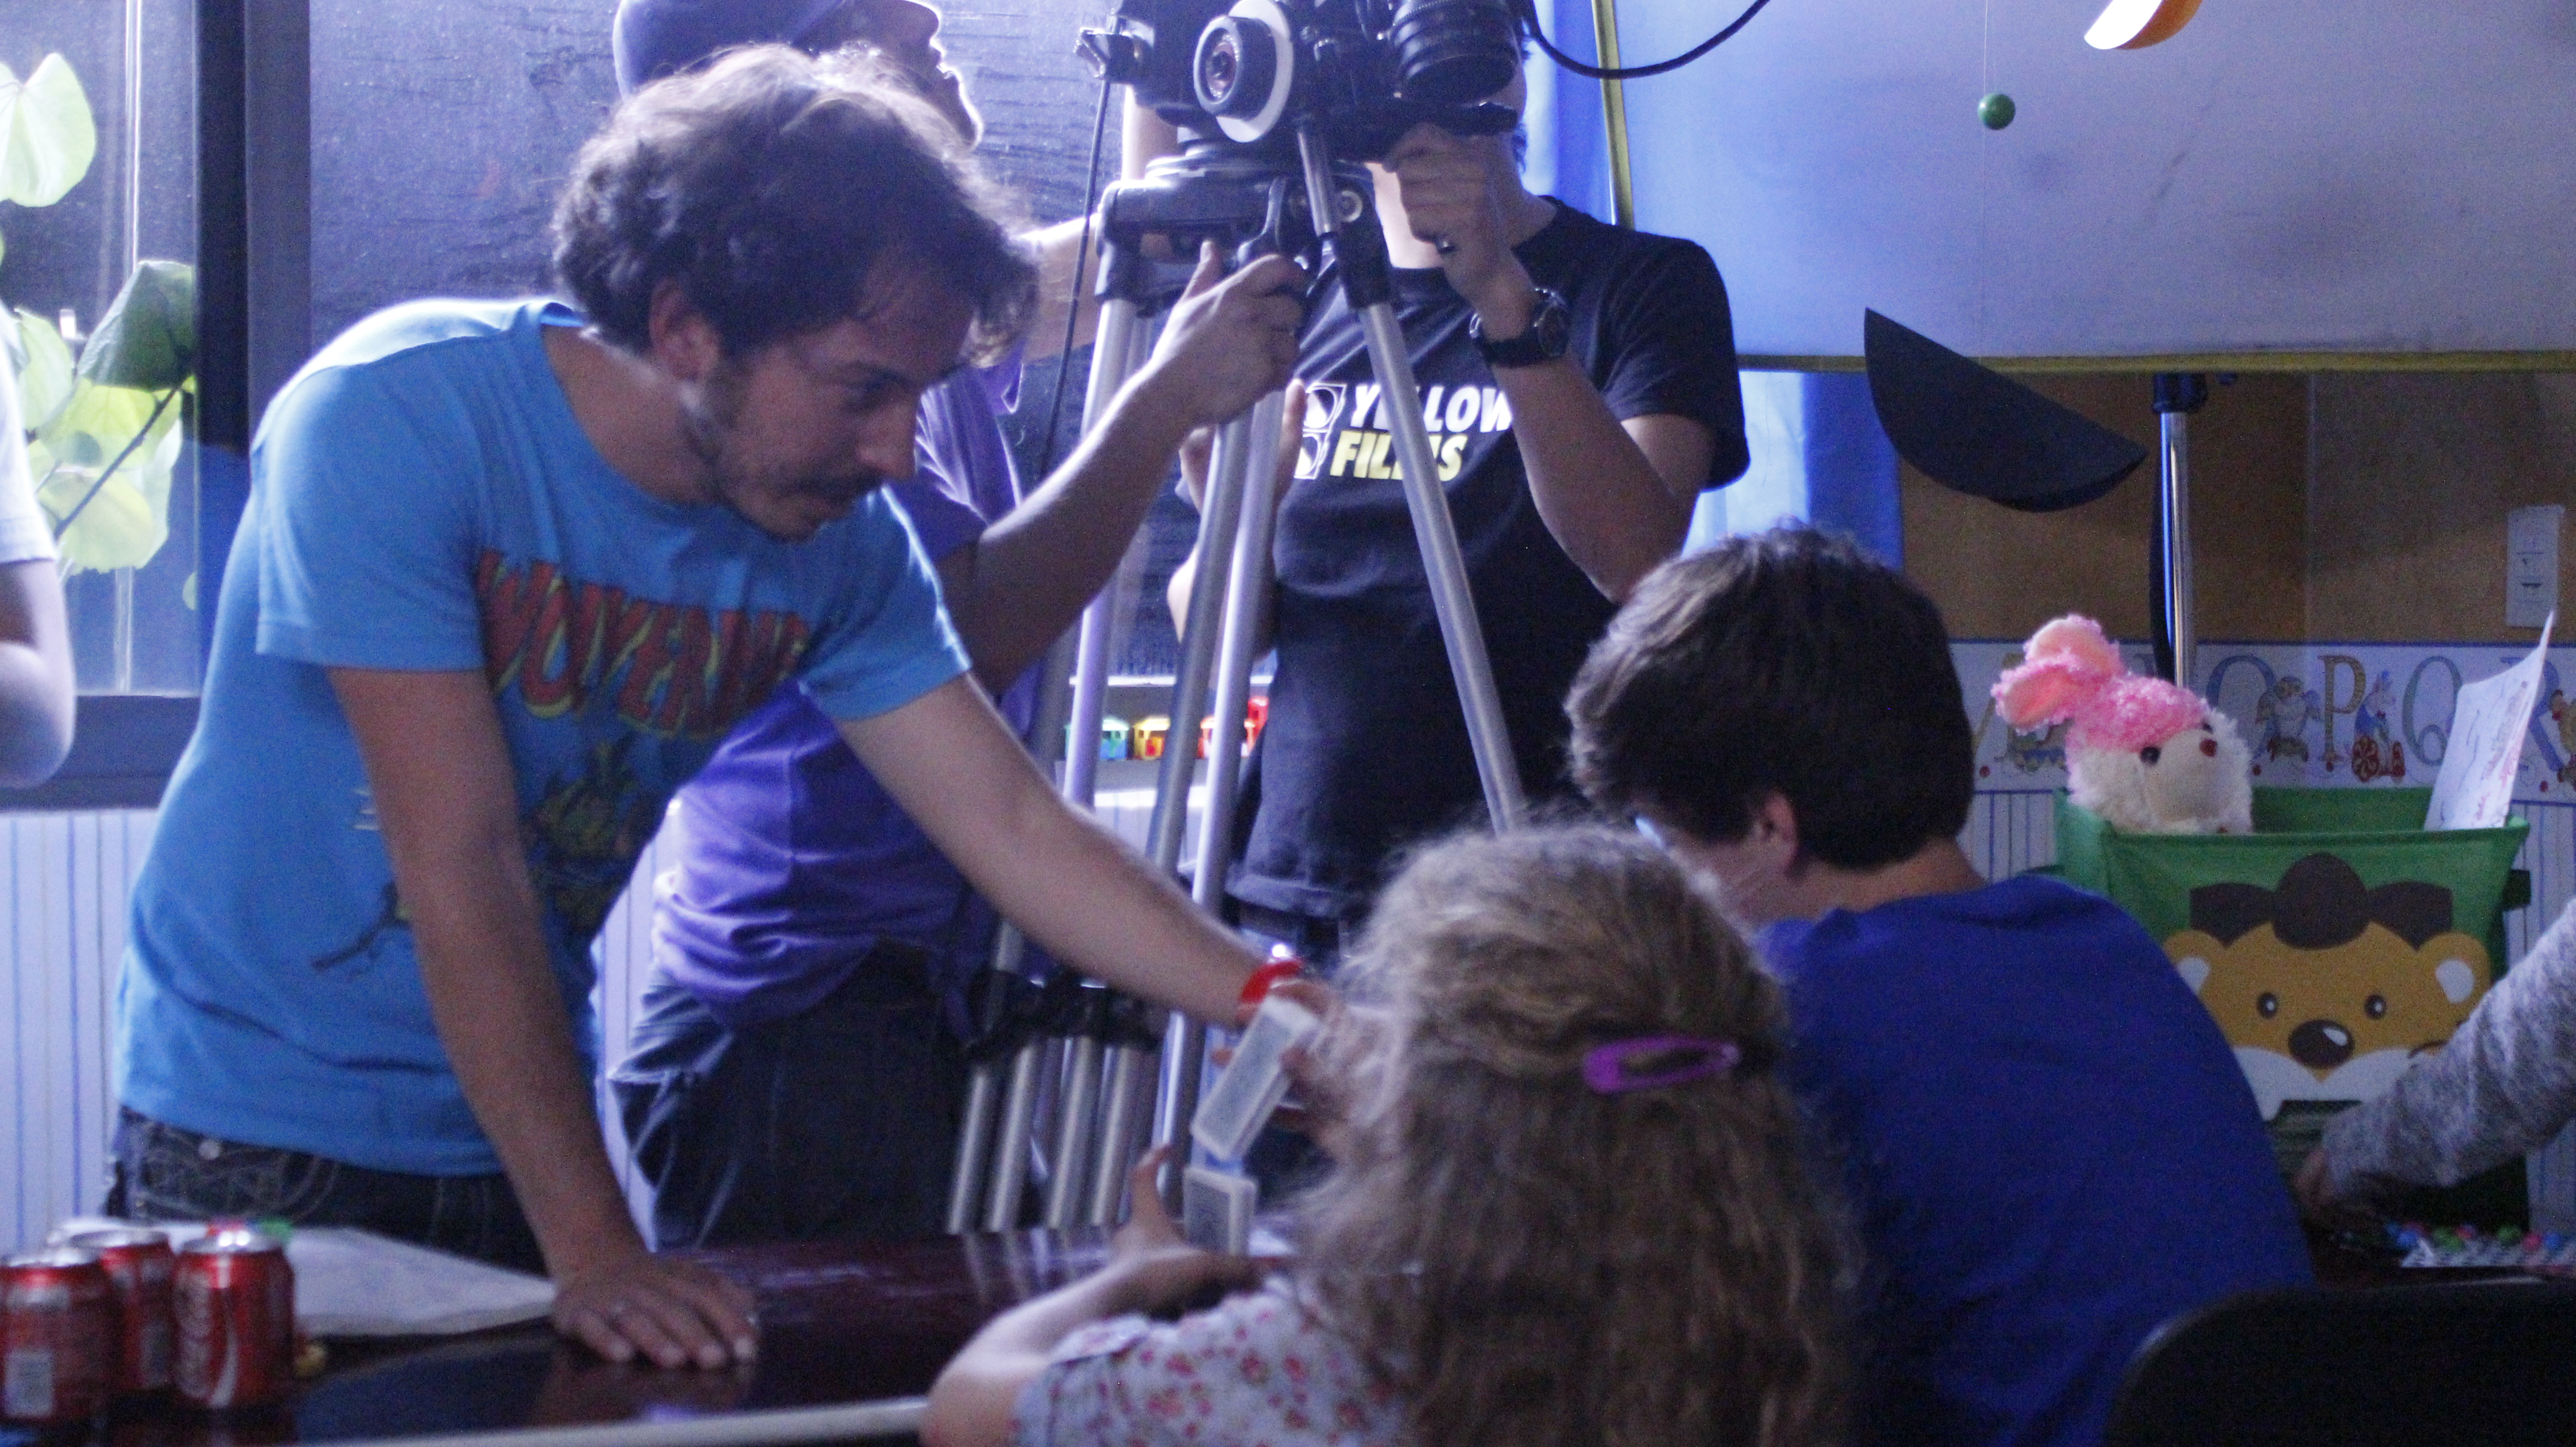 Director Isaac Ezban on the set of his first feature film THE INCIDENT (October 2013)